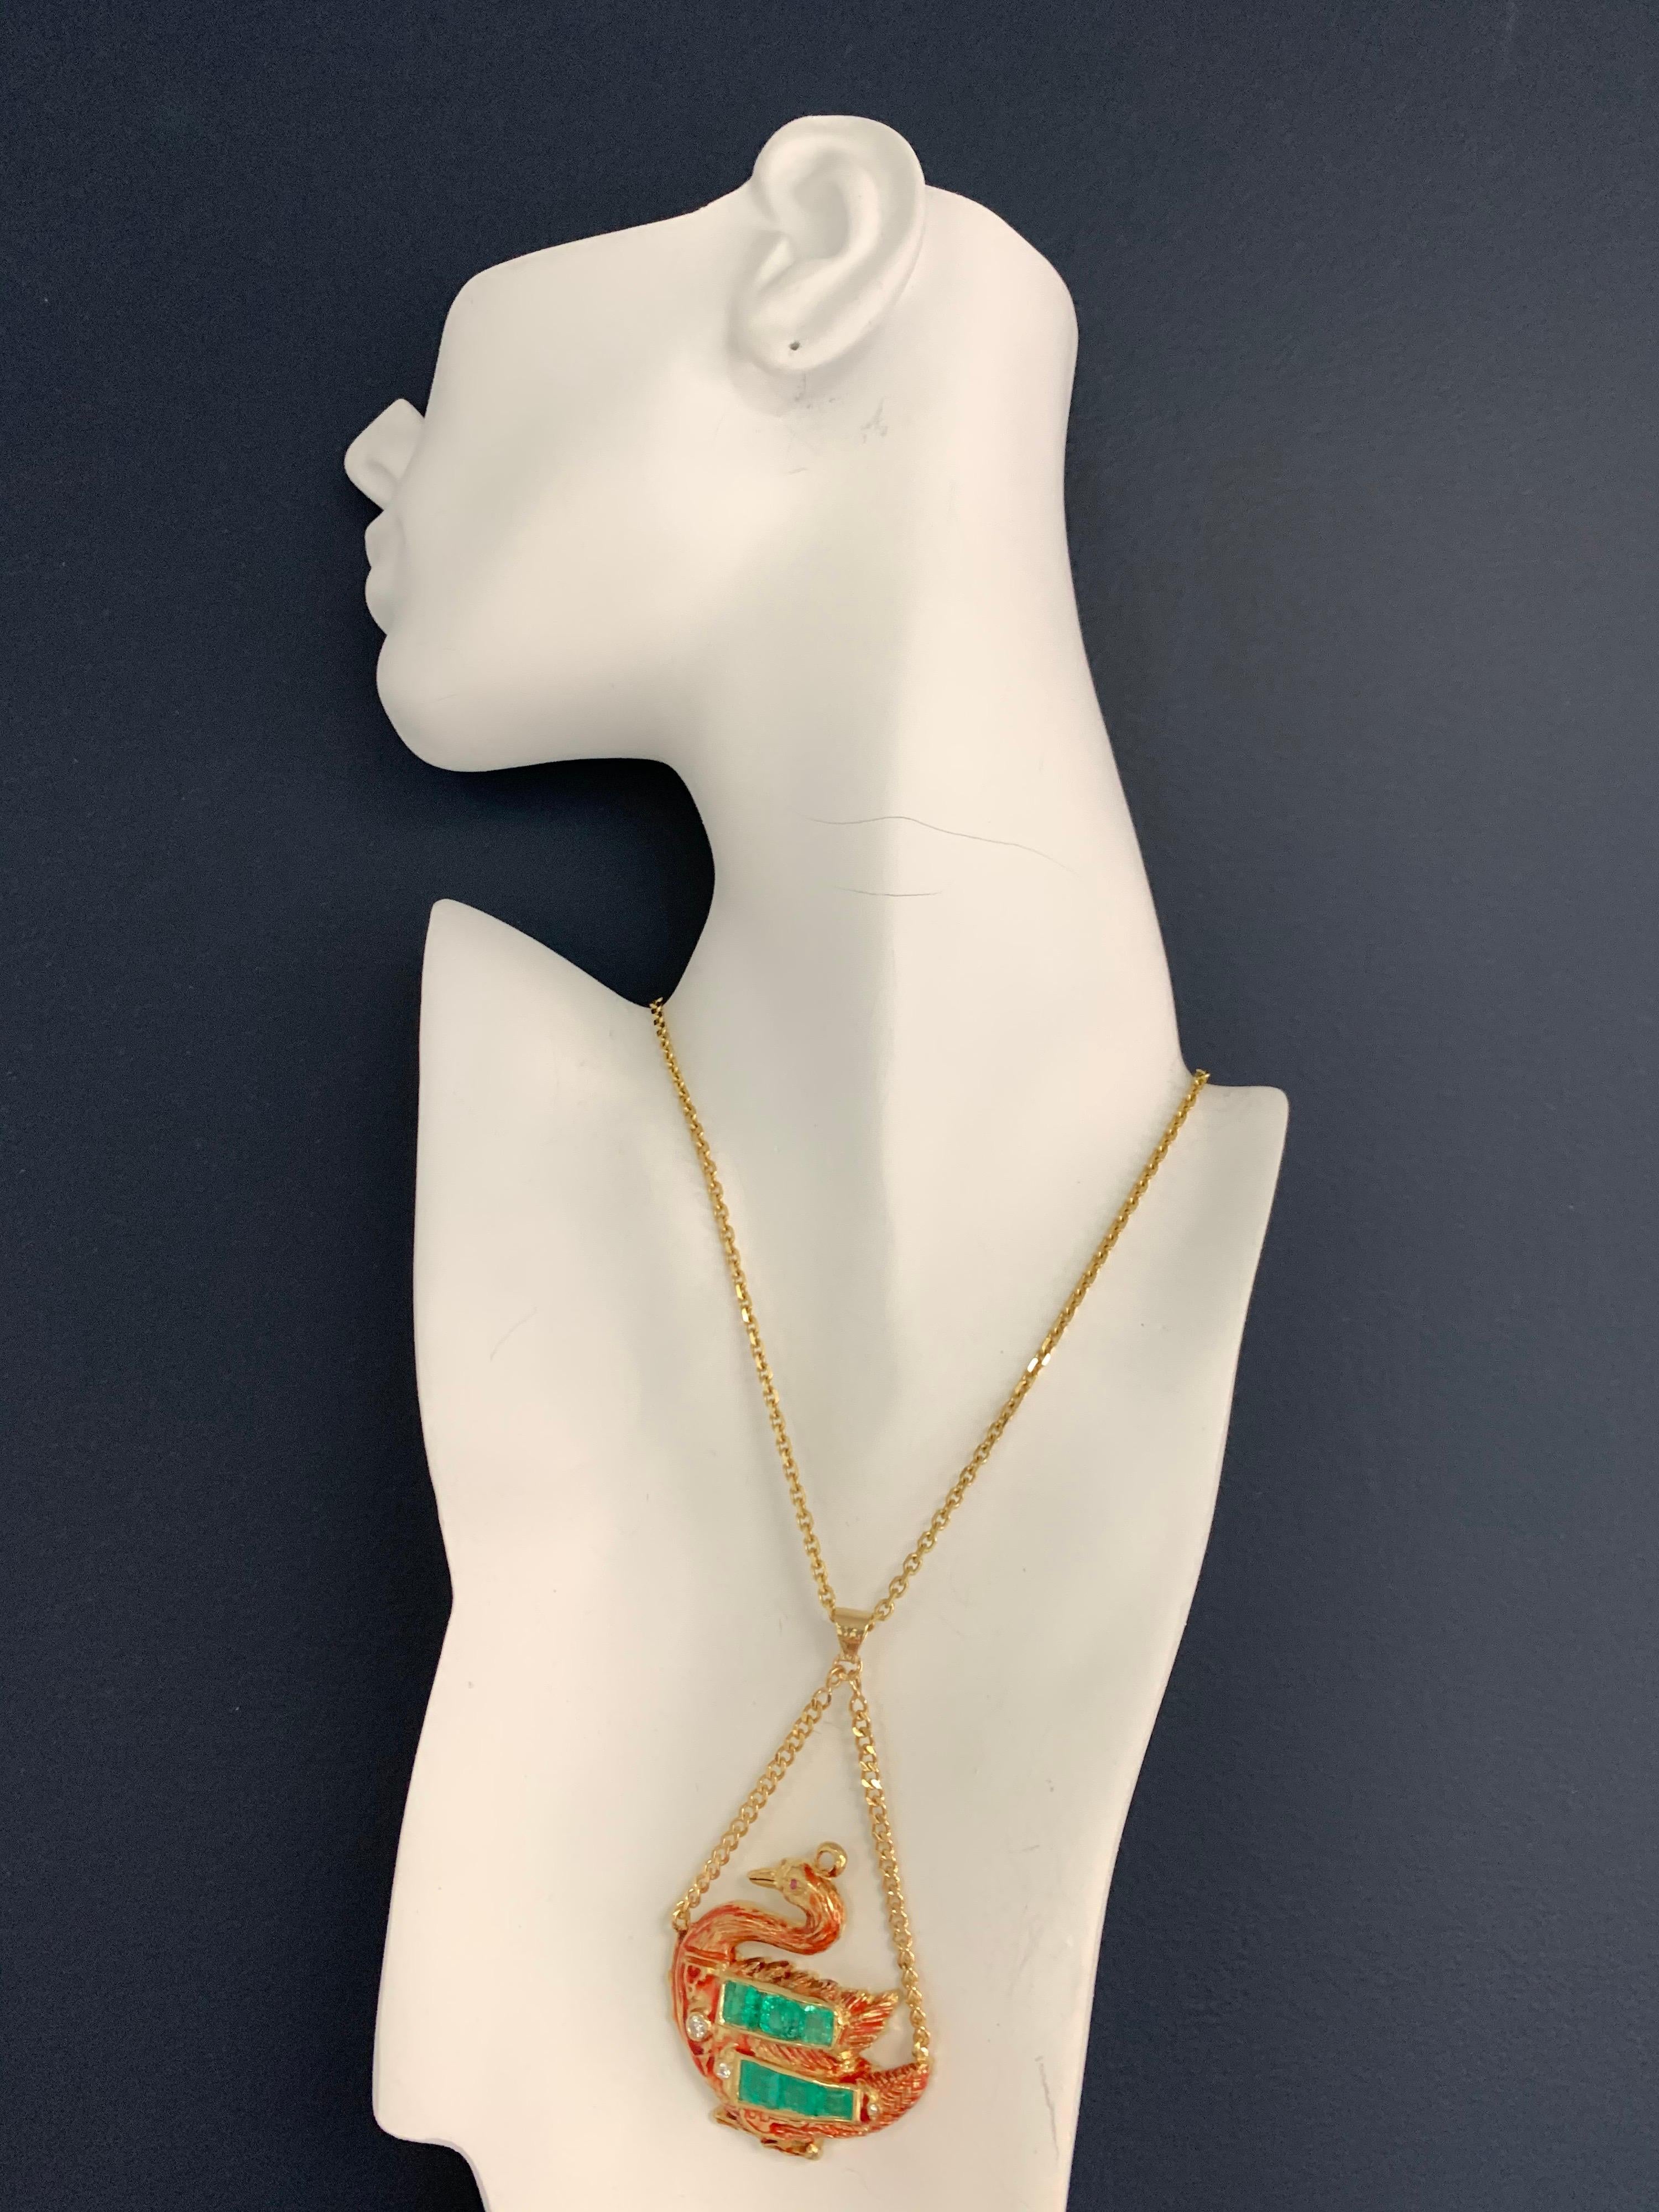 A rare Circa 1950 pendant with six natural Colombian emeralds (6.32cts) and three diamonds (0.18cts). Set in a stunning Swan frame in 18k gold (chain is 14k).

Chain is included, 18” inch.

 

The piece weighs 40.05 grams.